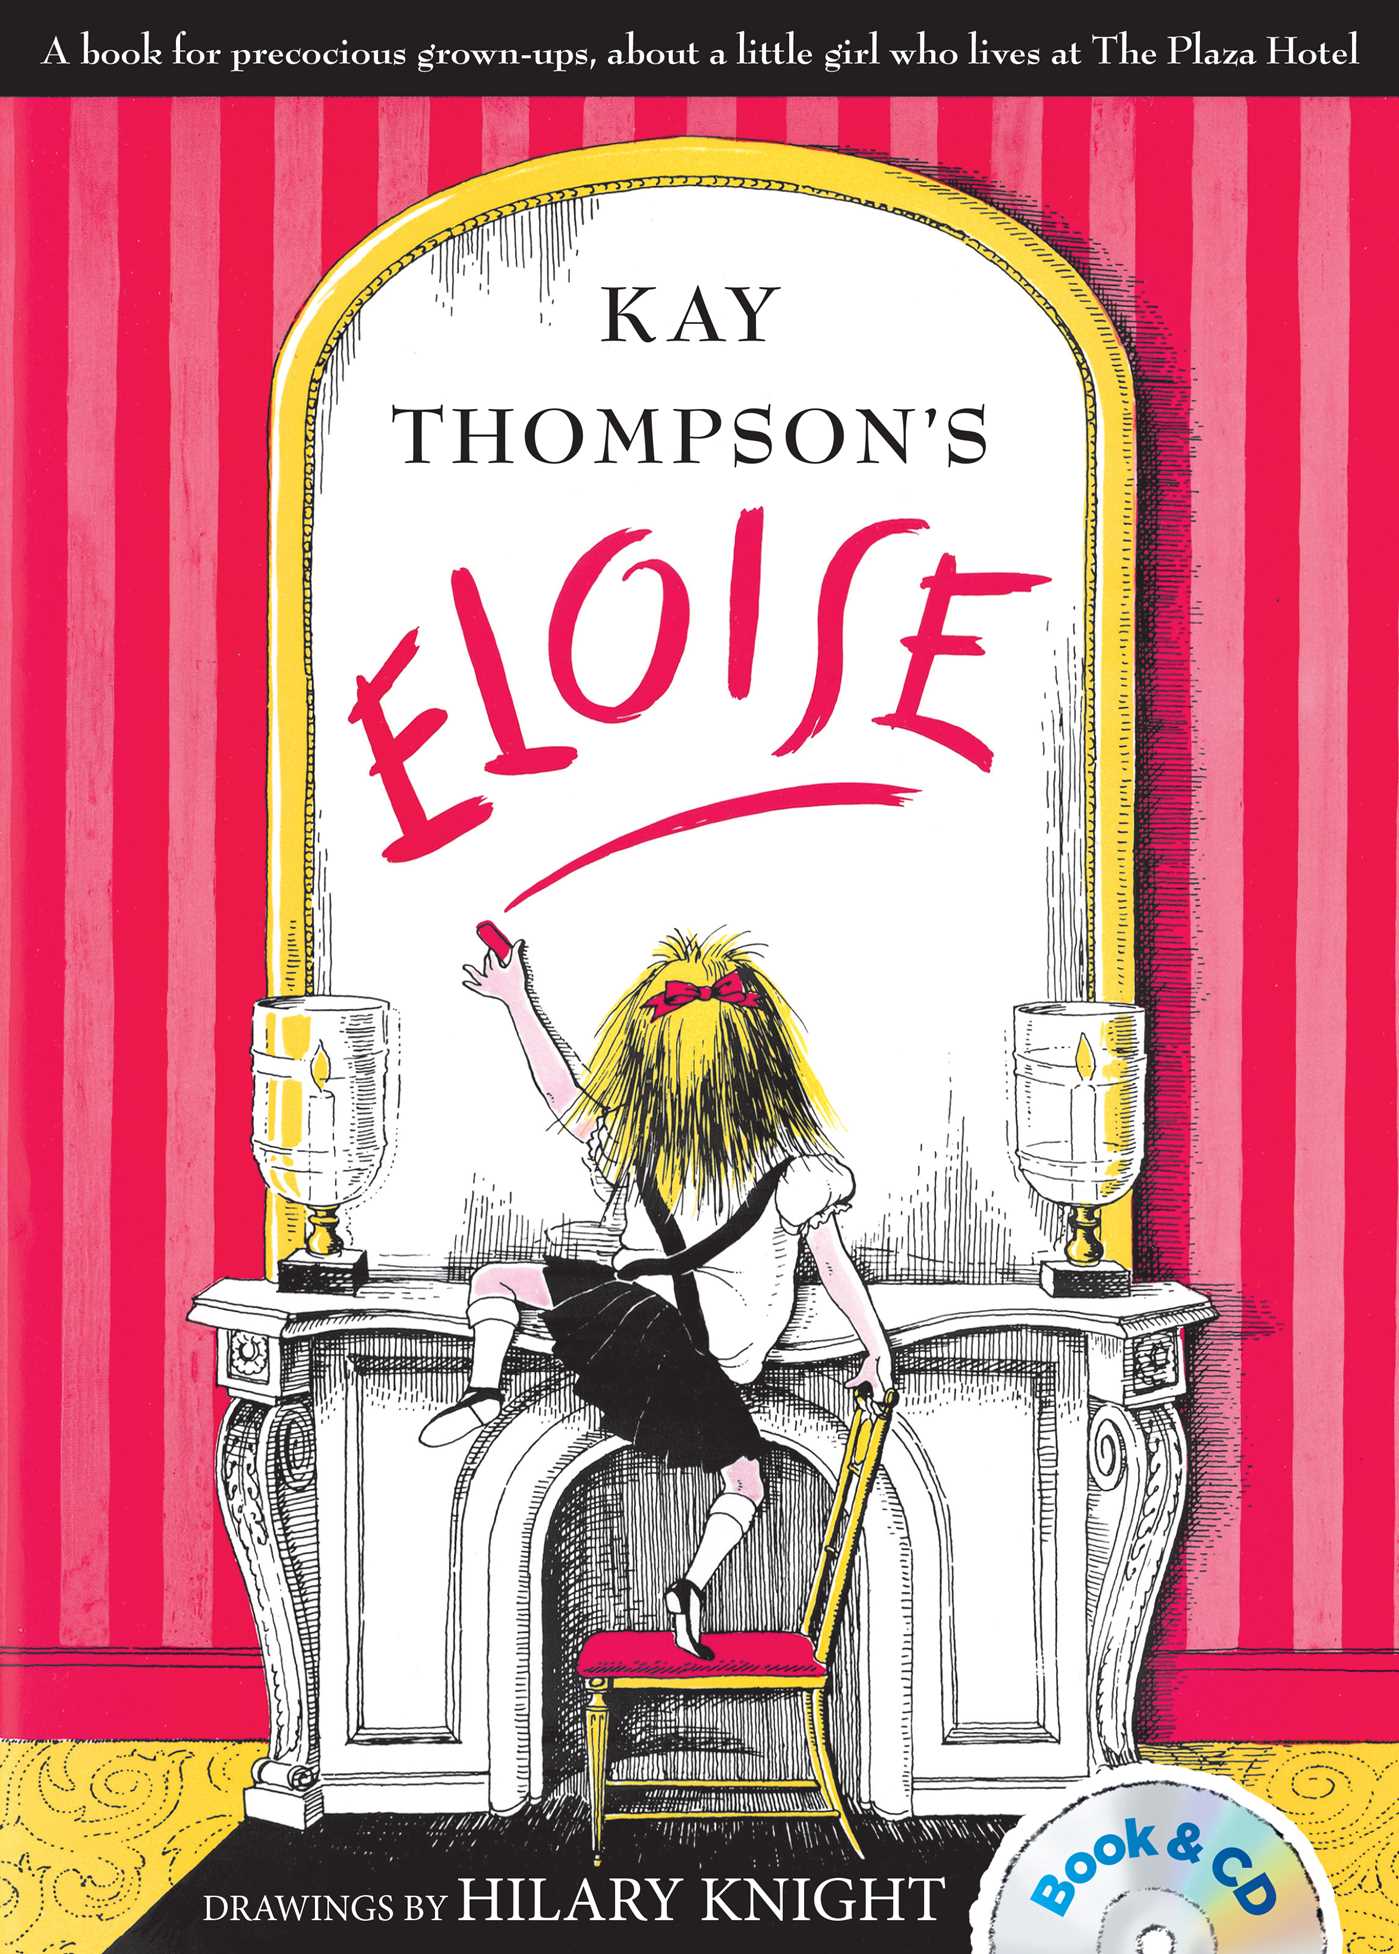 Eloise by Kay Thompson and Hilary Knight